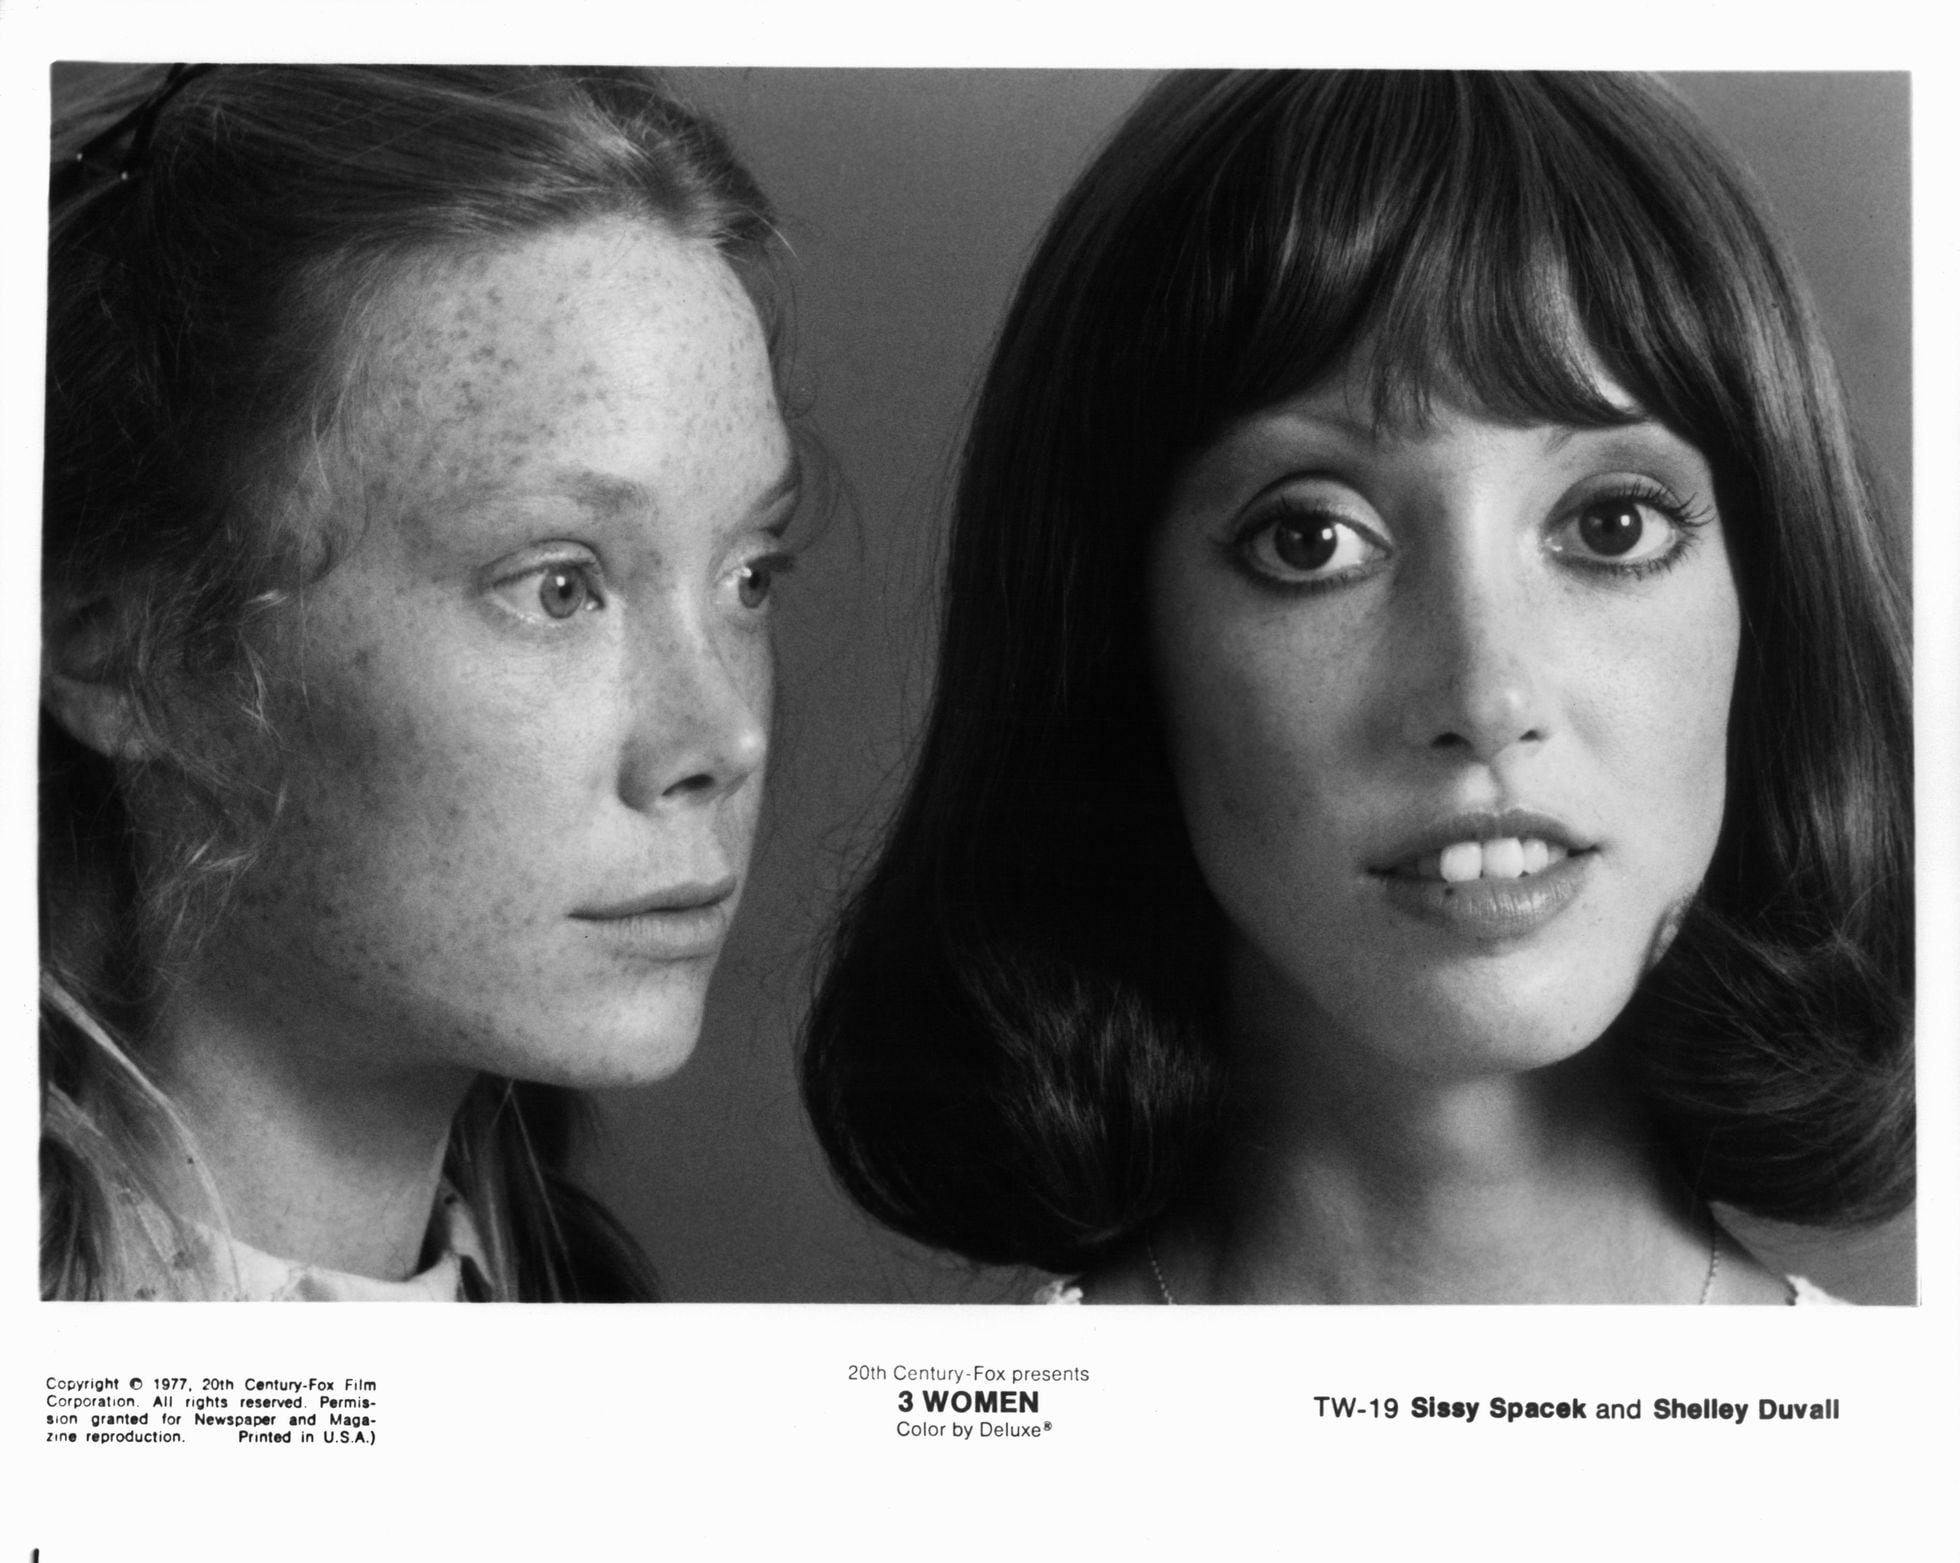 Shelley Duvall The Disappearance And Return Of A Star Pushed To Her Limits By The Film Industry